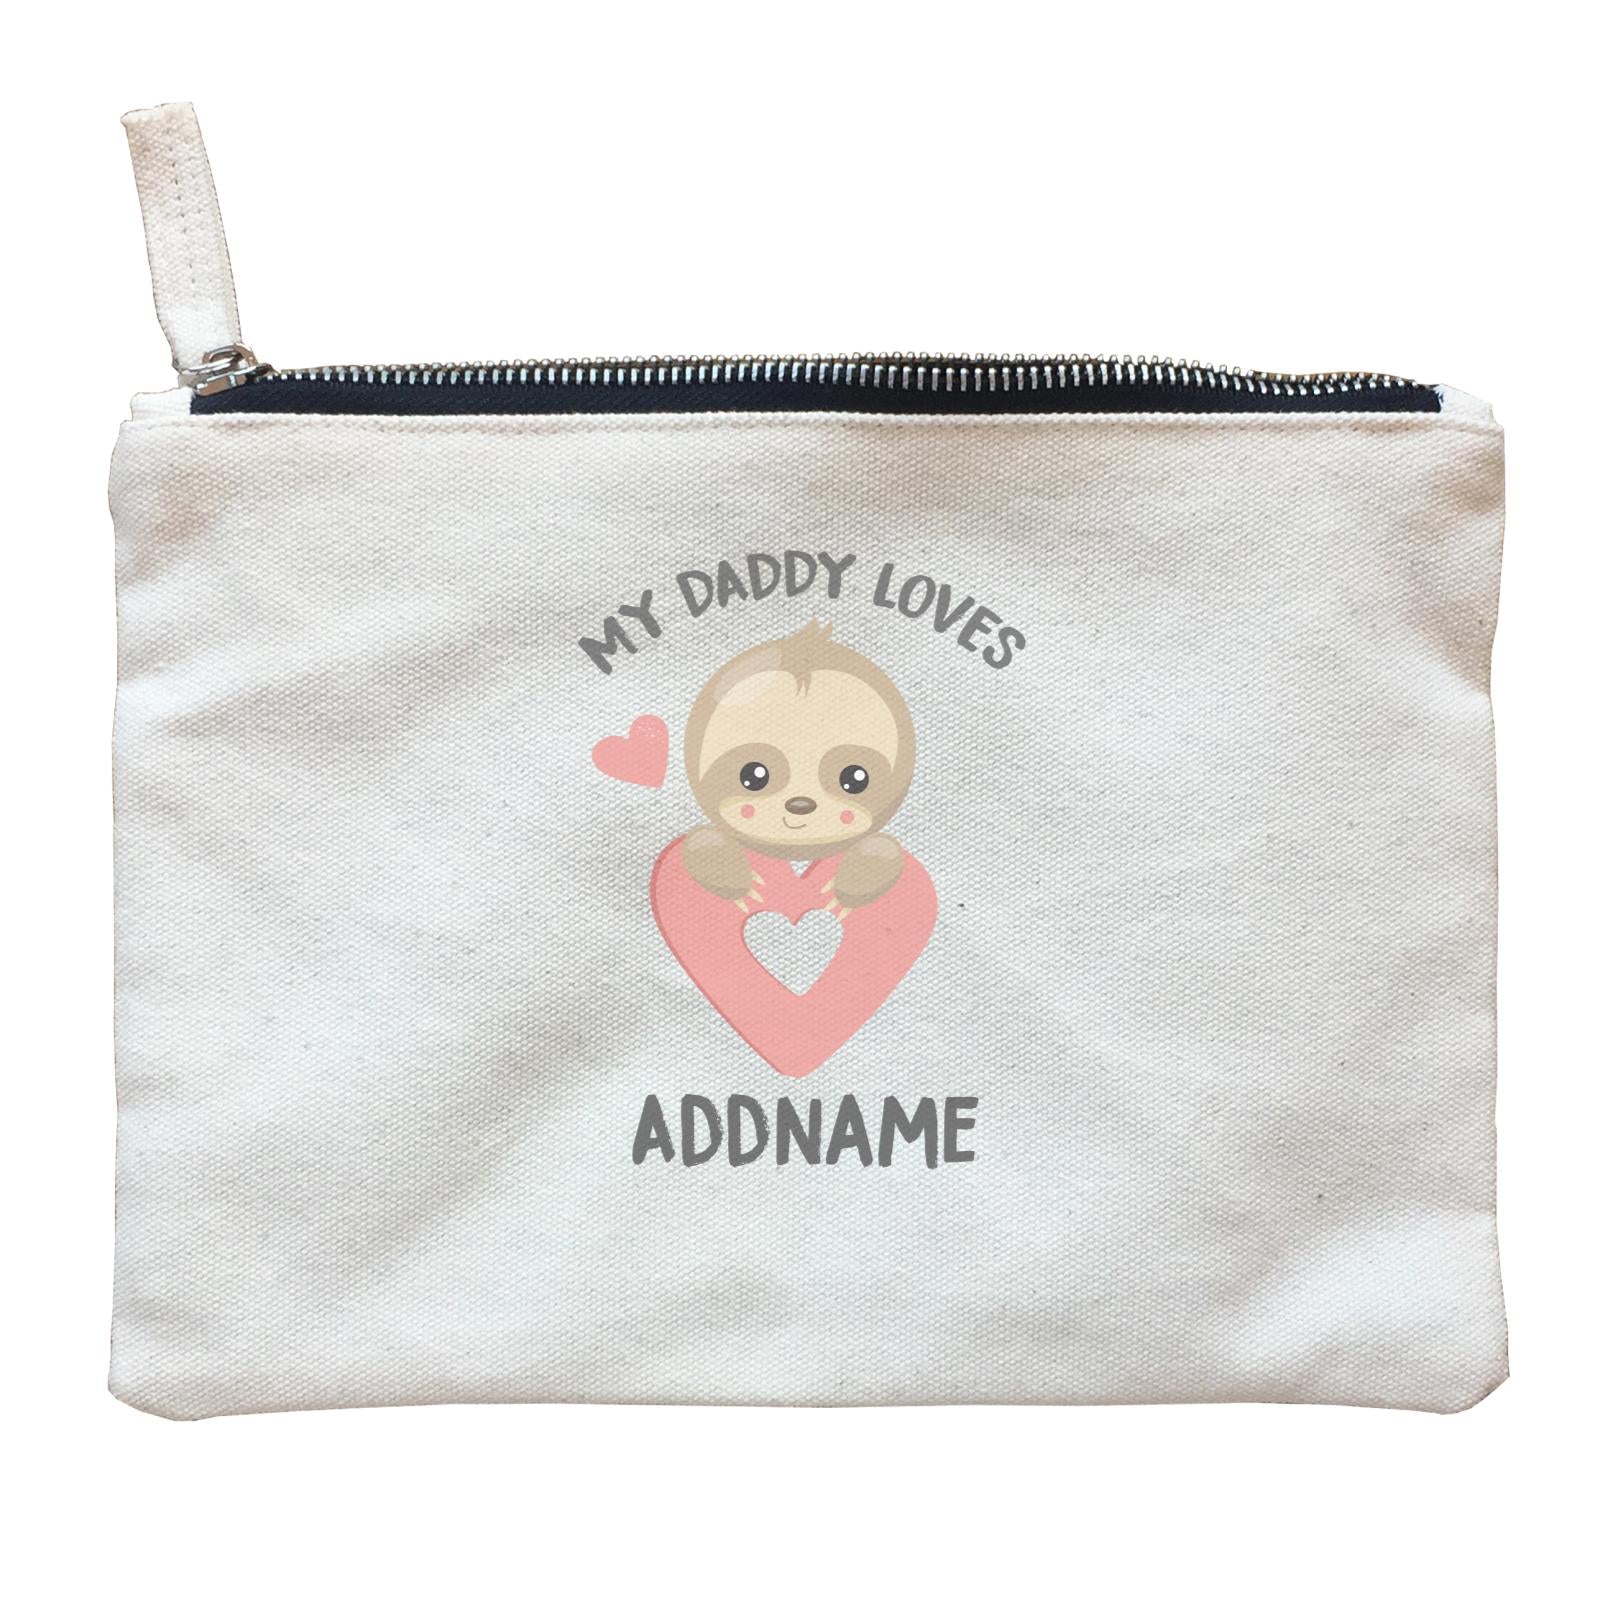 Cute Sloth My Daddy Loves Addname Zipper Pouch